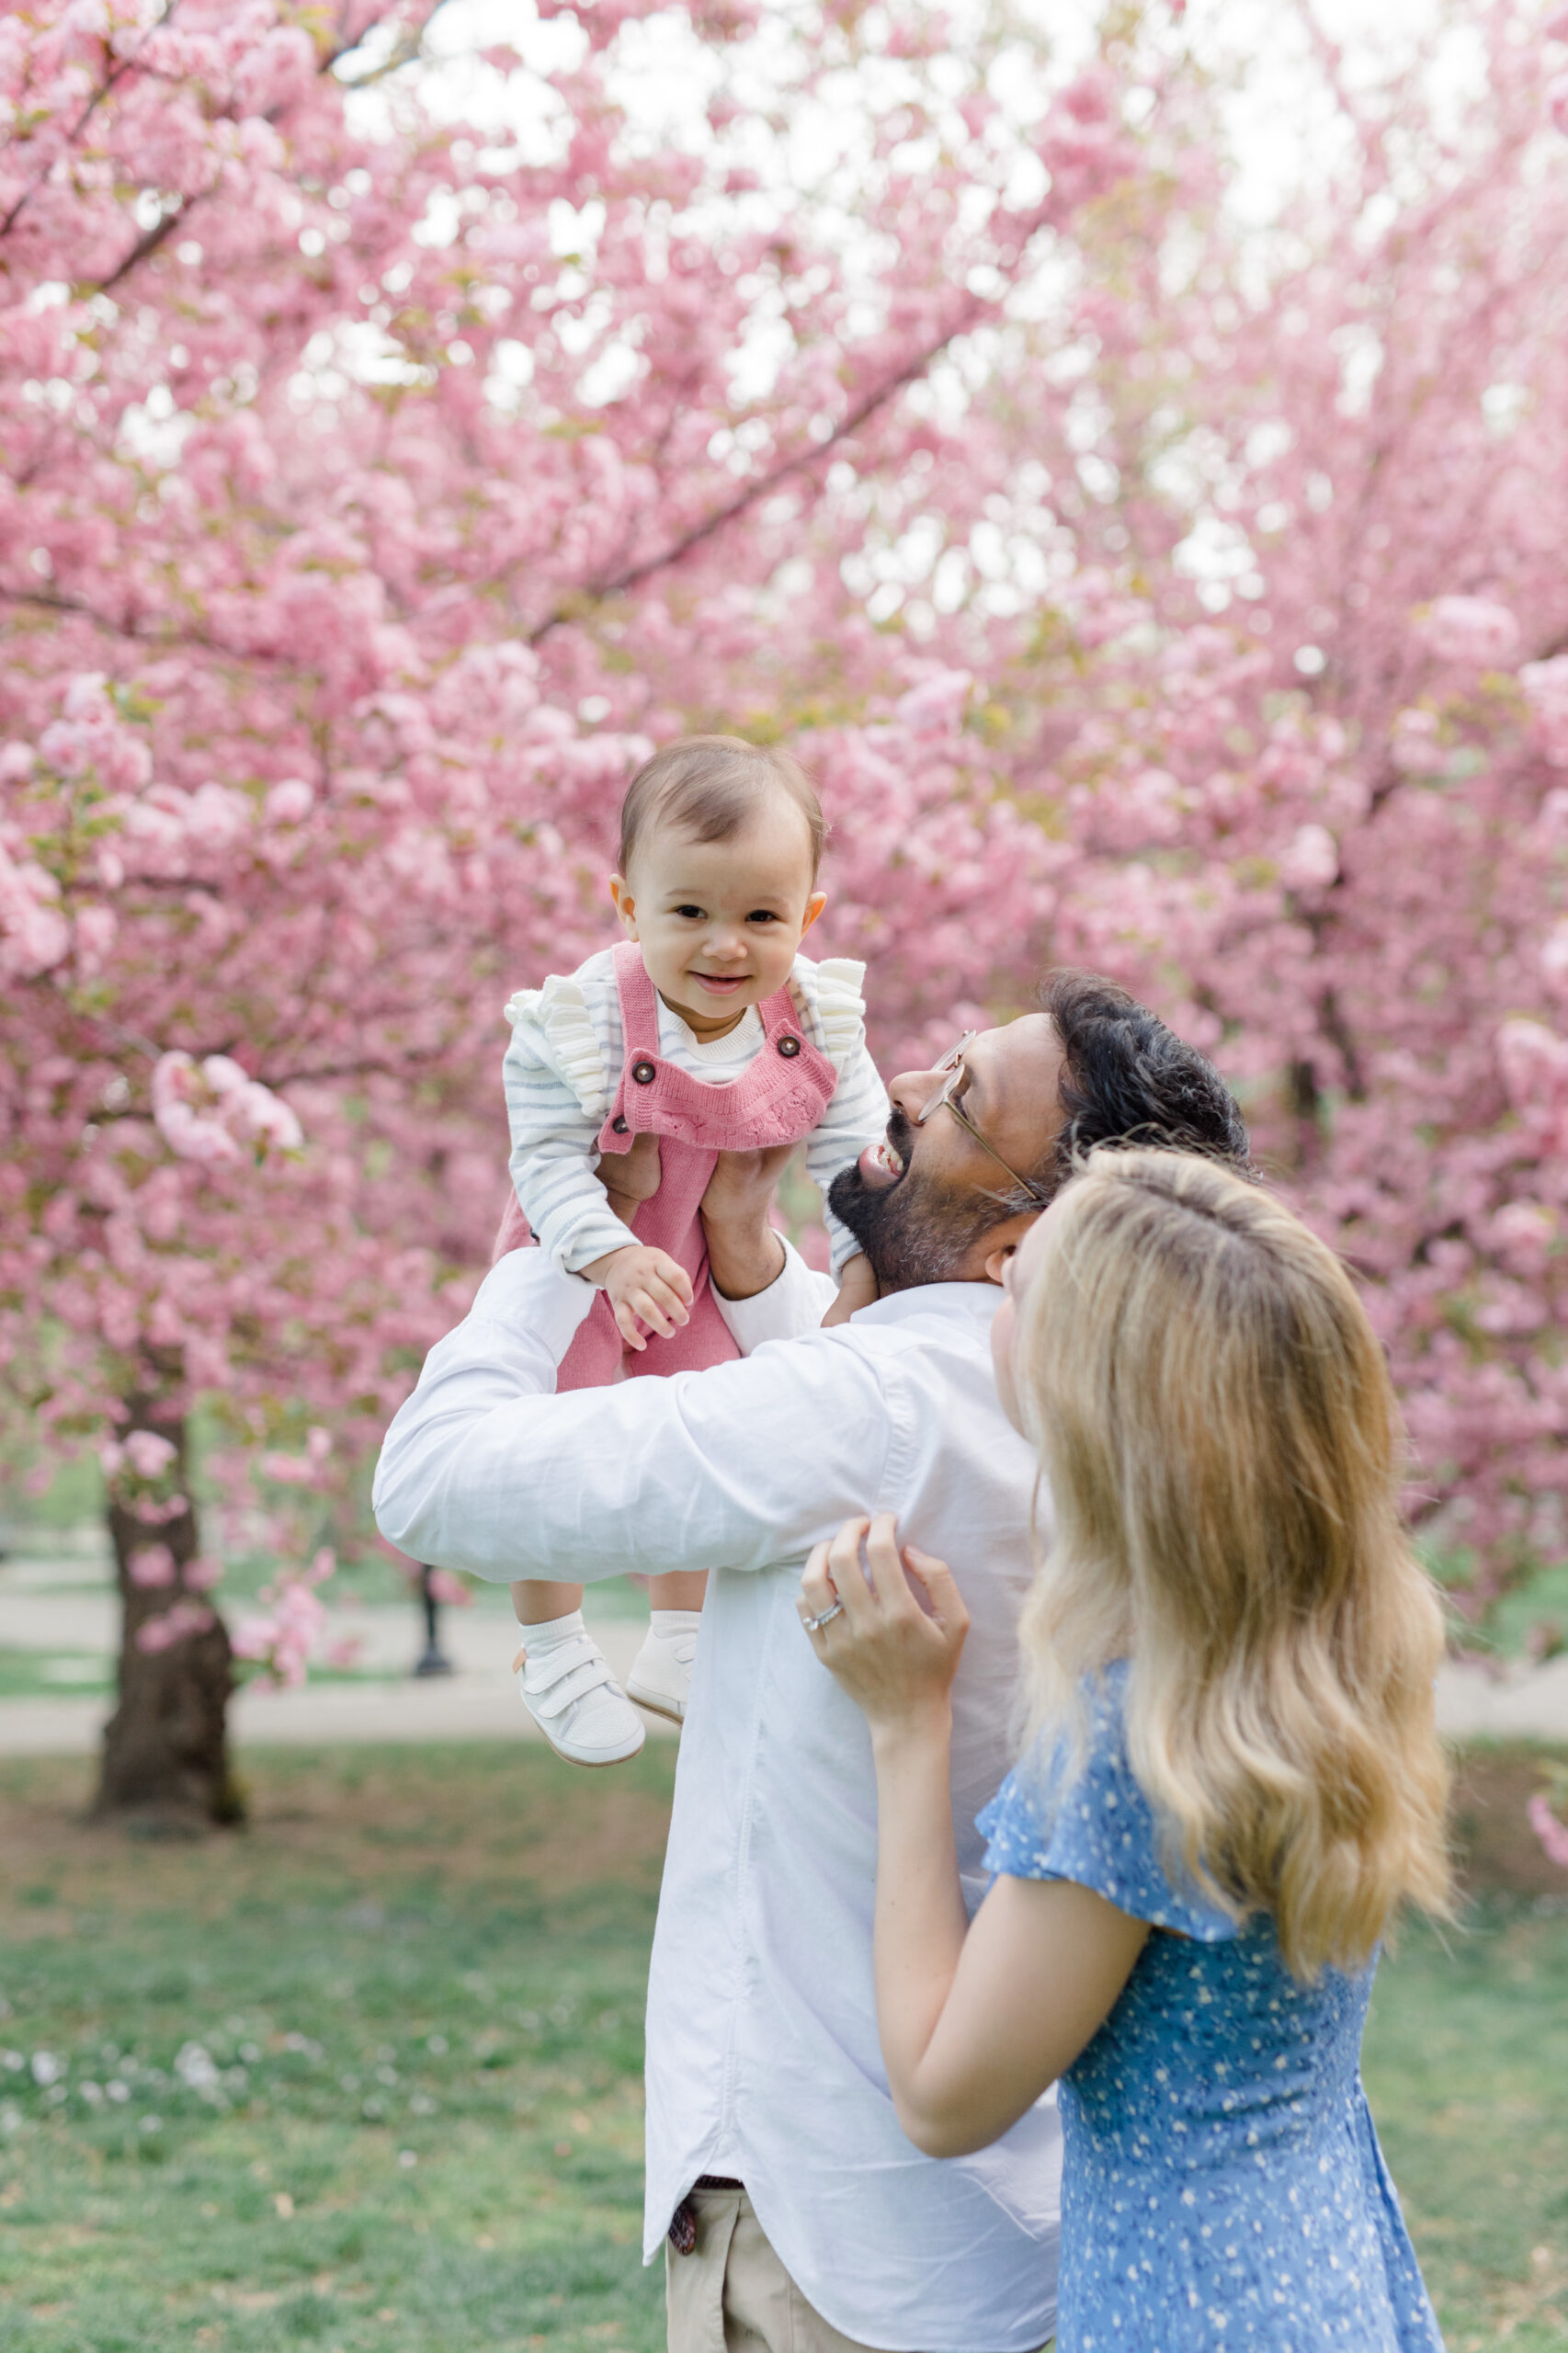 A dad and mom with their baby at a spring mini session in Central Park, shot by Jacqueline Clair Photography